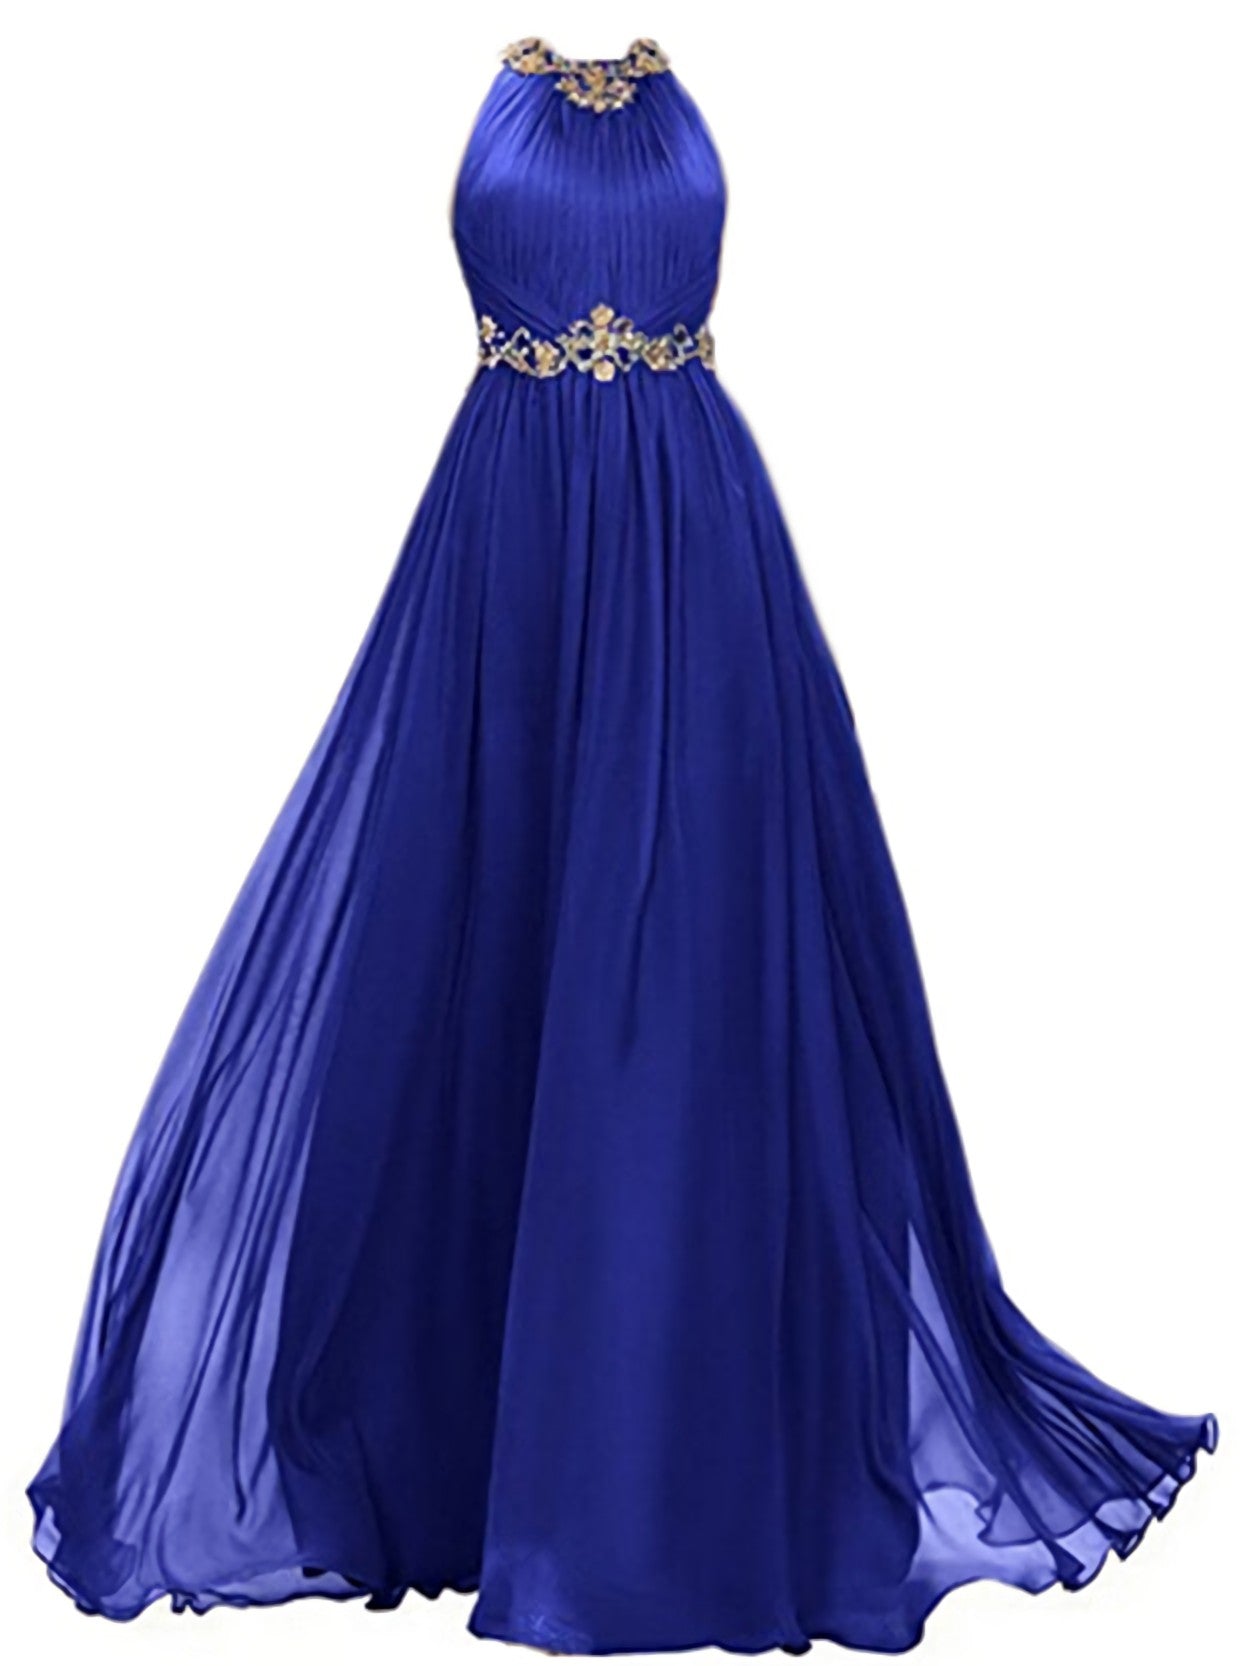 Womens Chiffon Beaded Prom Dress, Jewel Long Evening Dress, A Line Prom Gown With Gold Belt